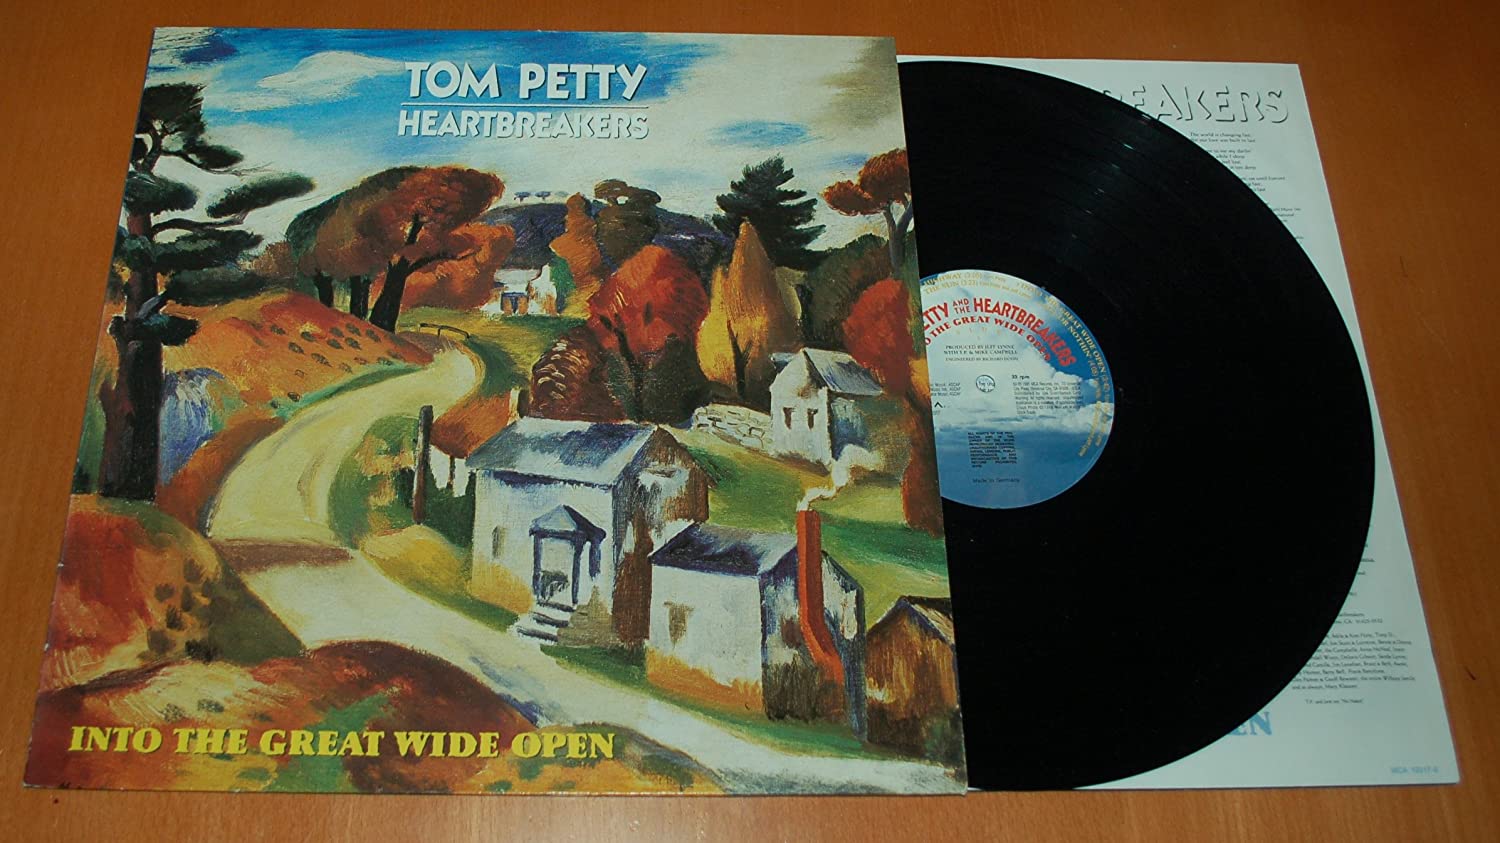 Into the great wide open - Tom Petty